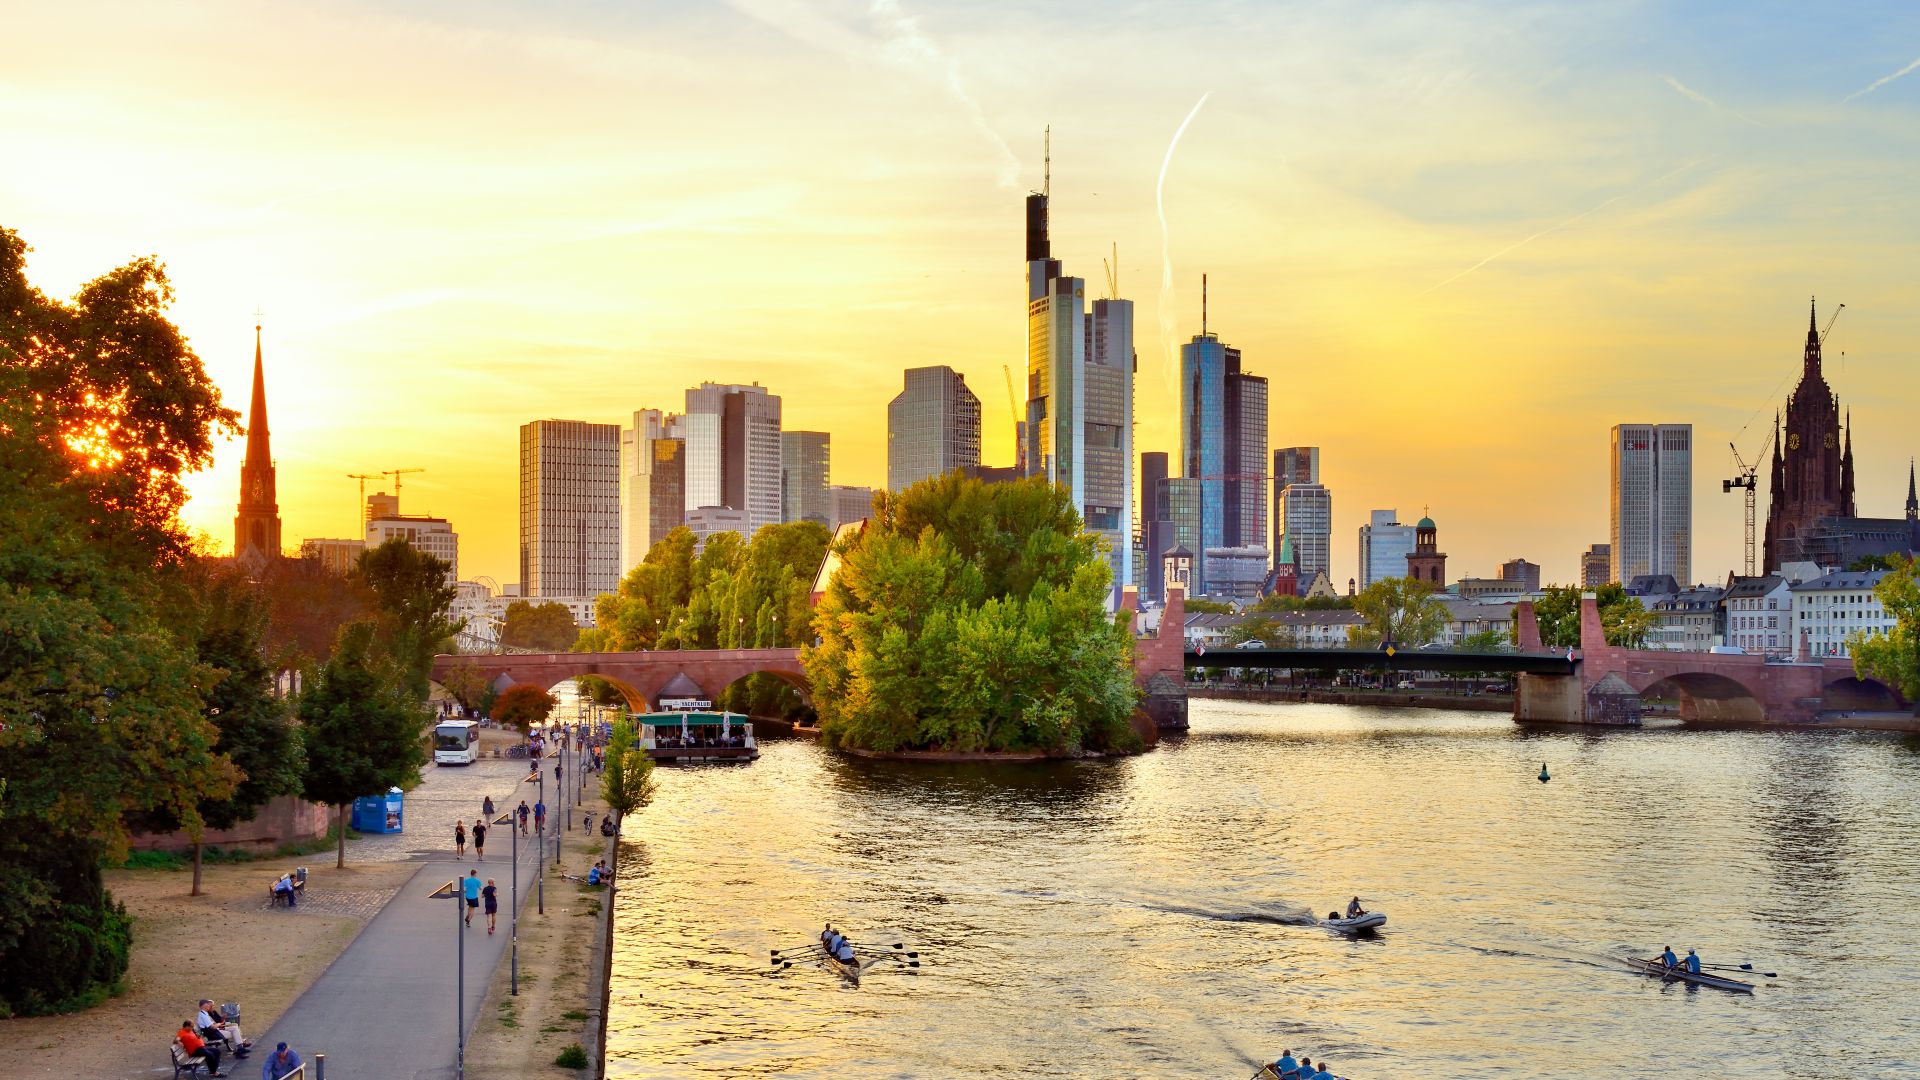 Frankfurt am Main: The skyline on the banks of the Main at sunset